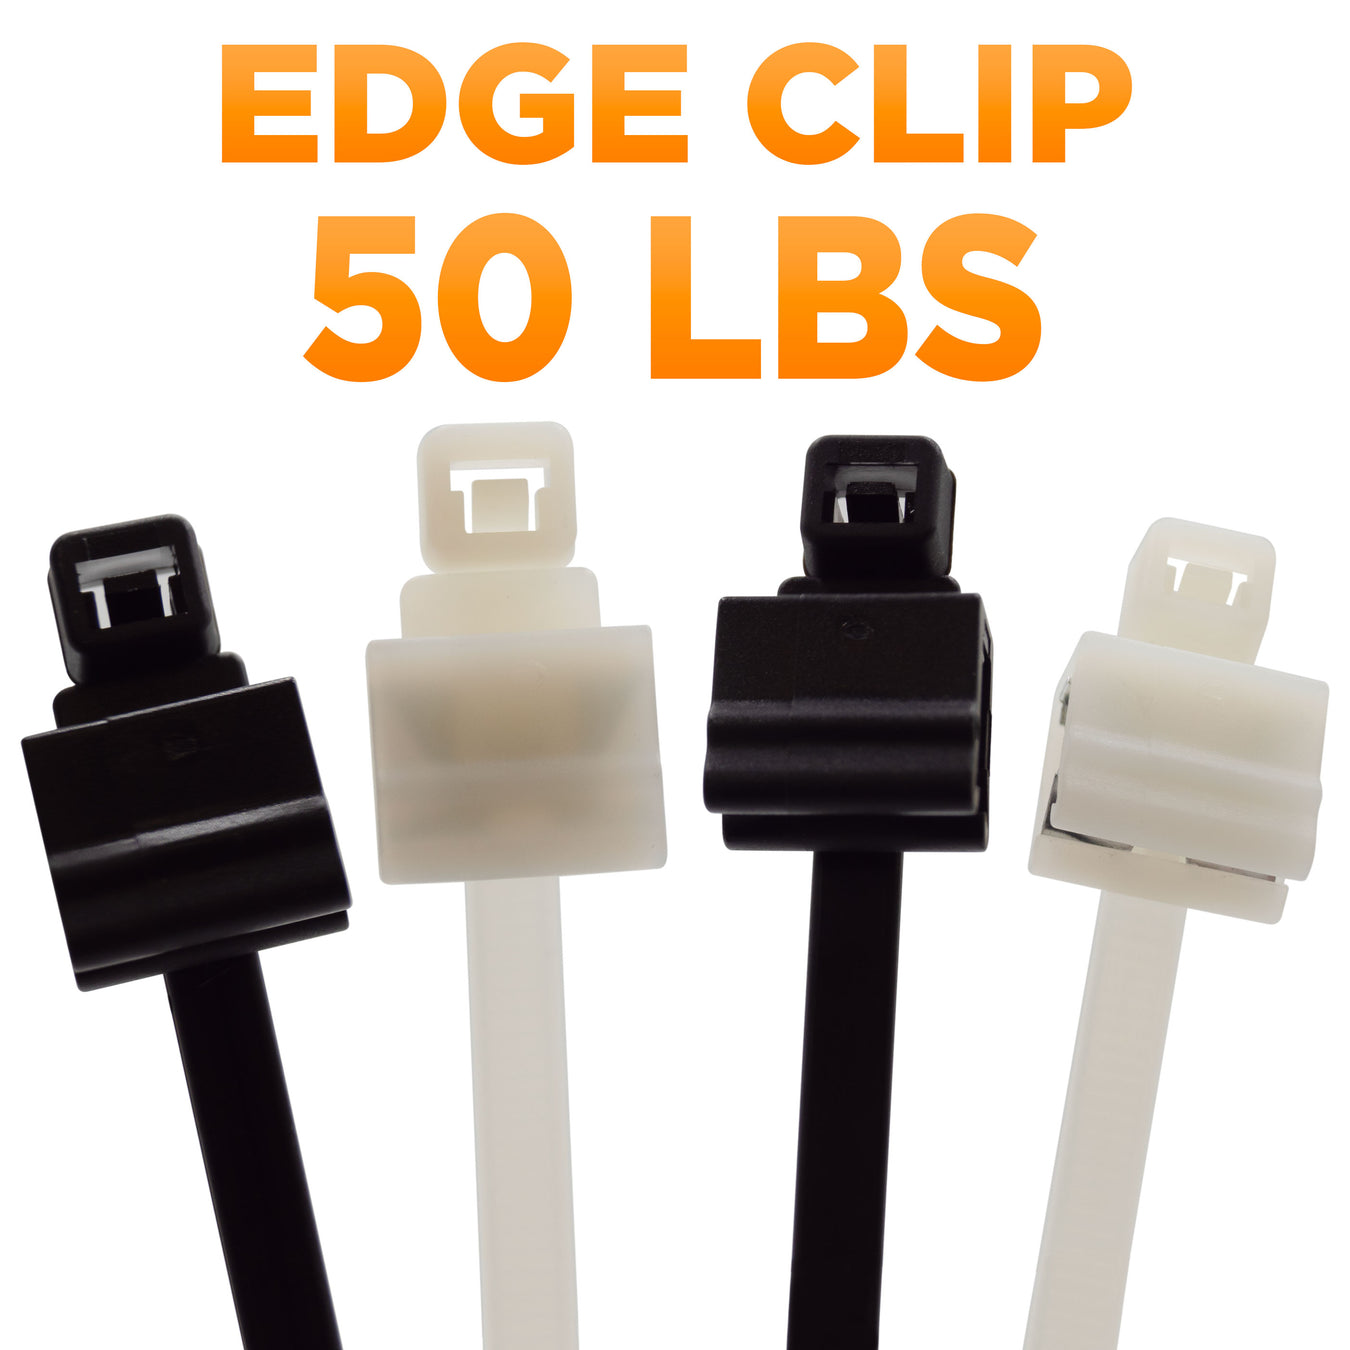 Edge Clip Cable Ties